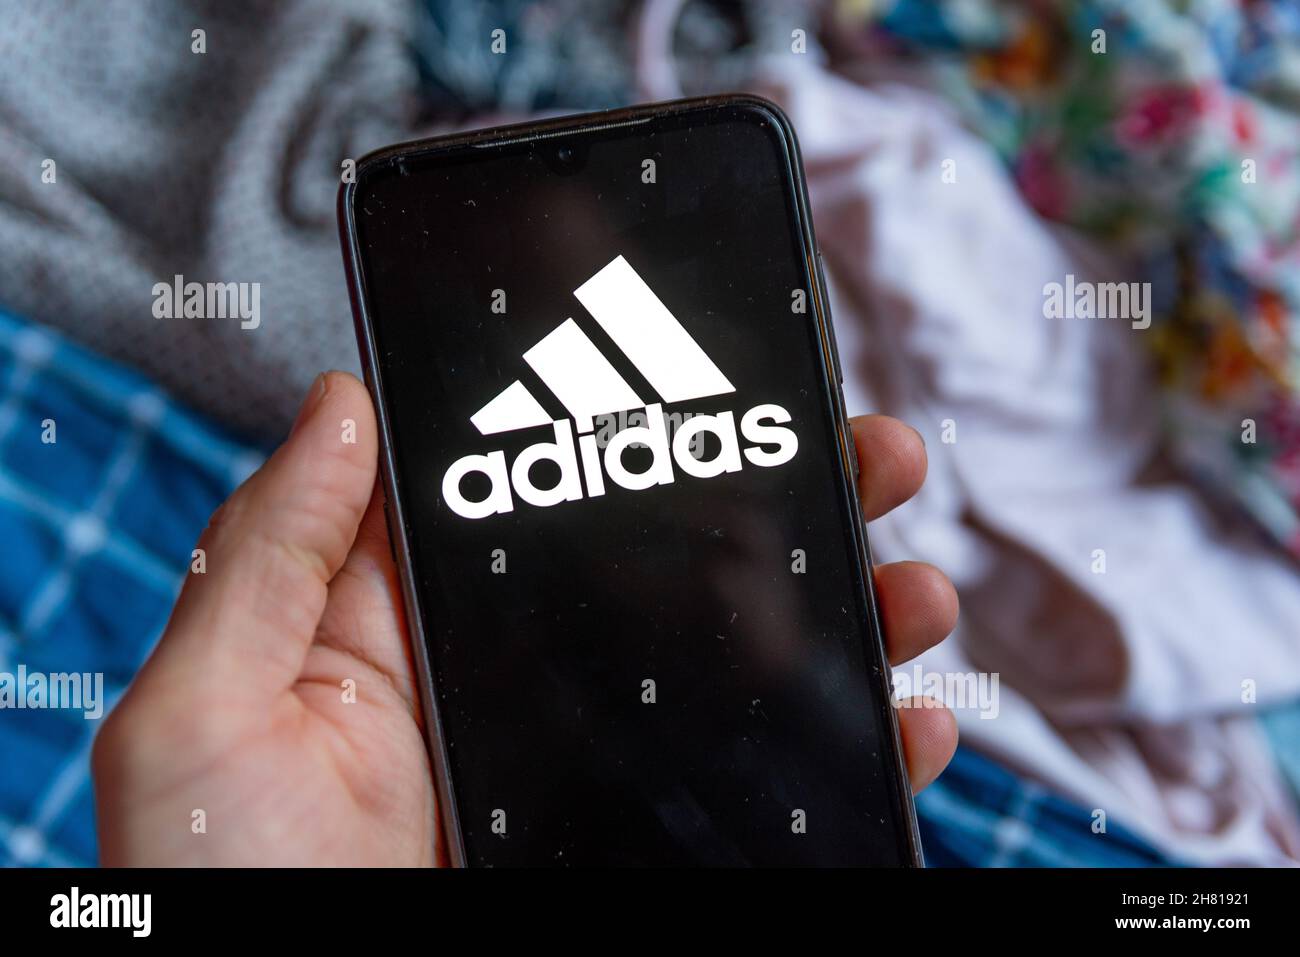 Spain. 26th Nov, 2021. The fashion retailer Adidas mobile app logo is seen  on the screen of a mobile phone in Barcelona, Spain on November 26, 2021.  Online shopping is very popular